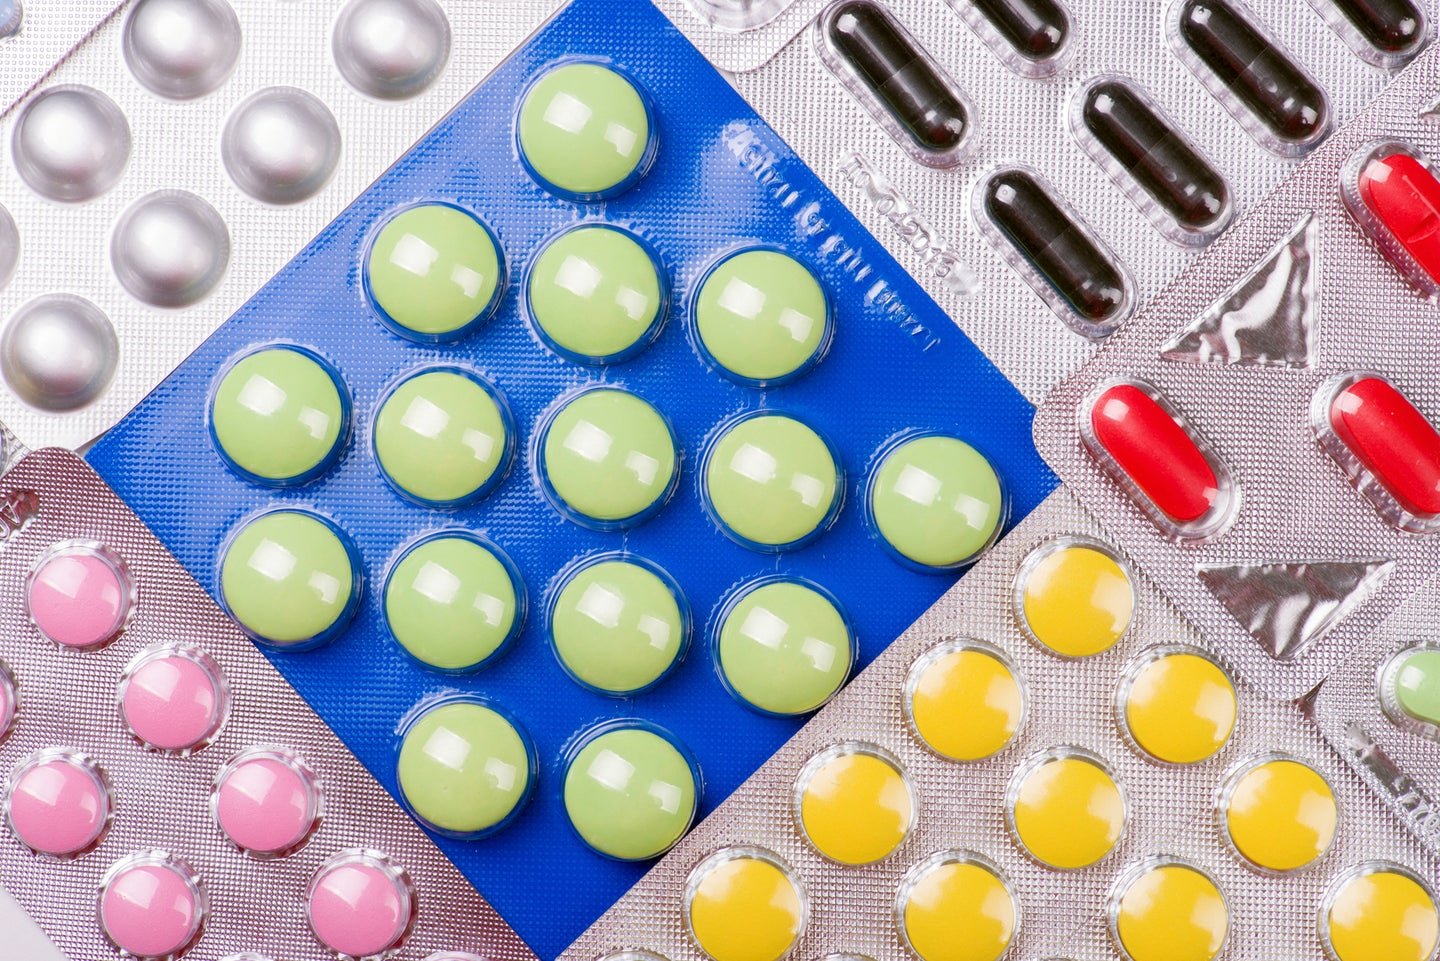 This birth control pill for men could begin human trials later this year